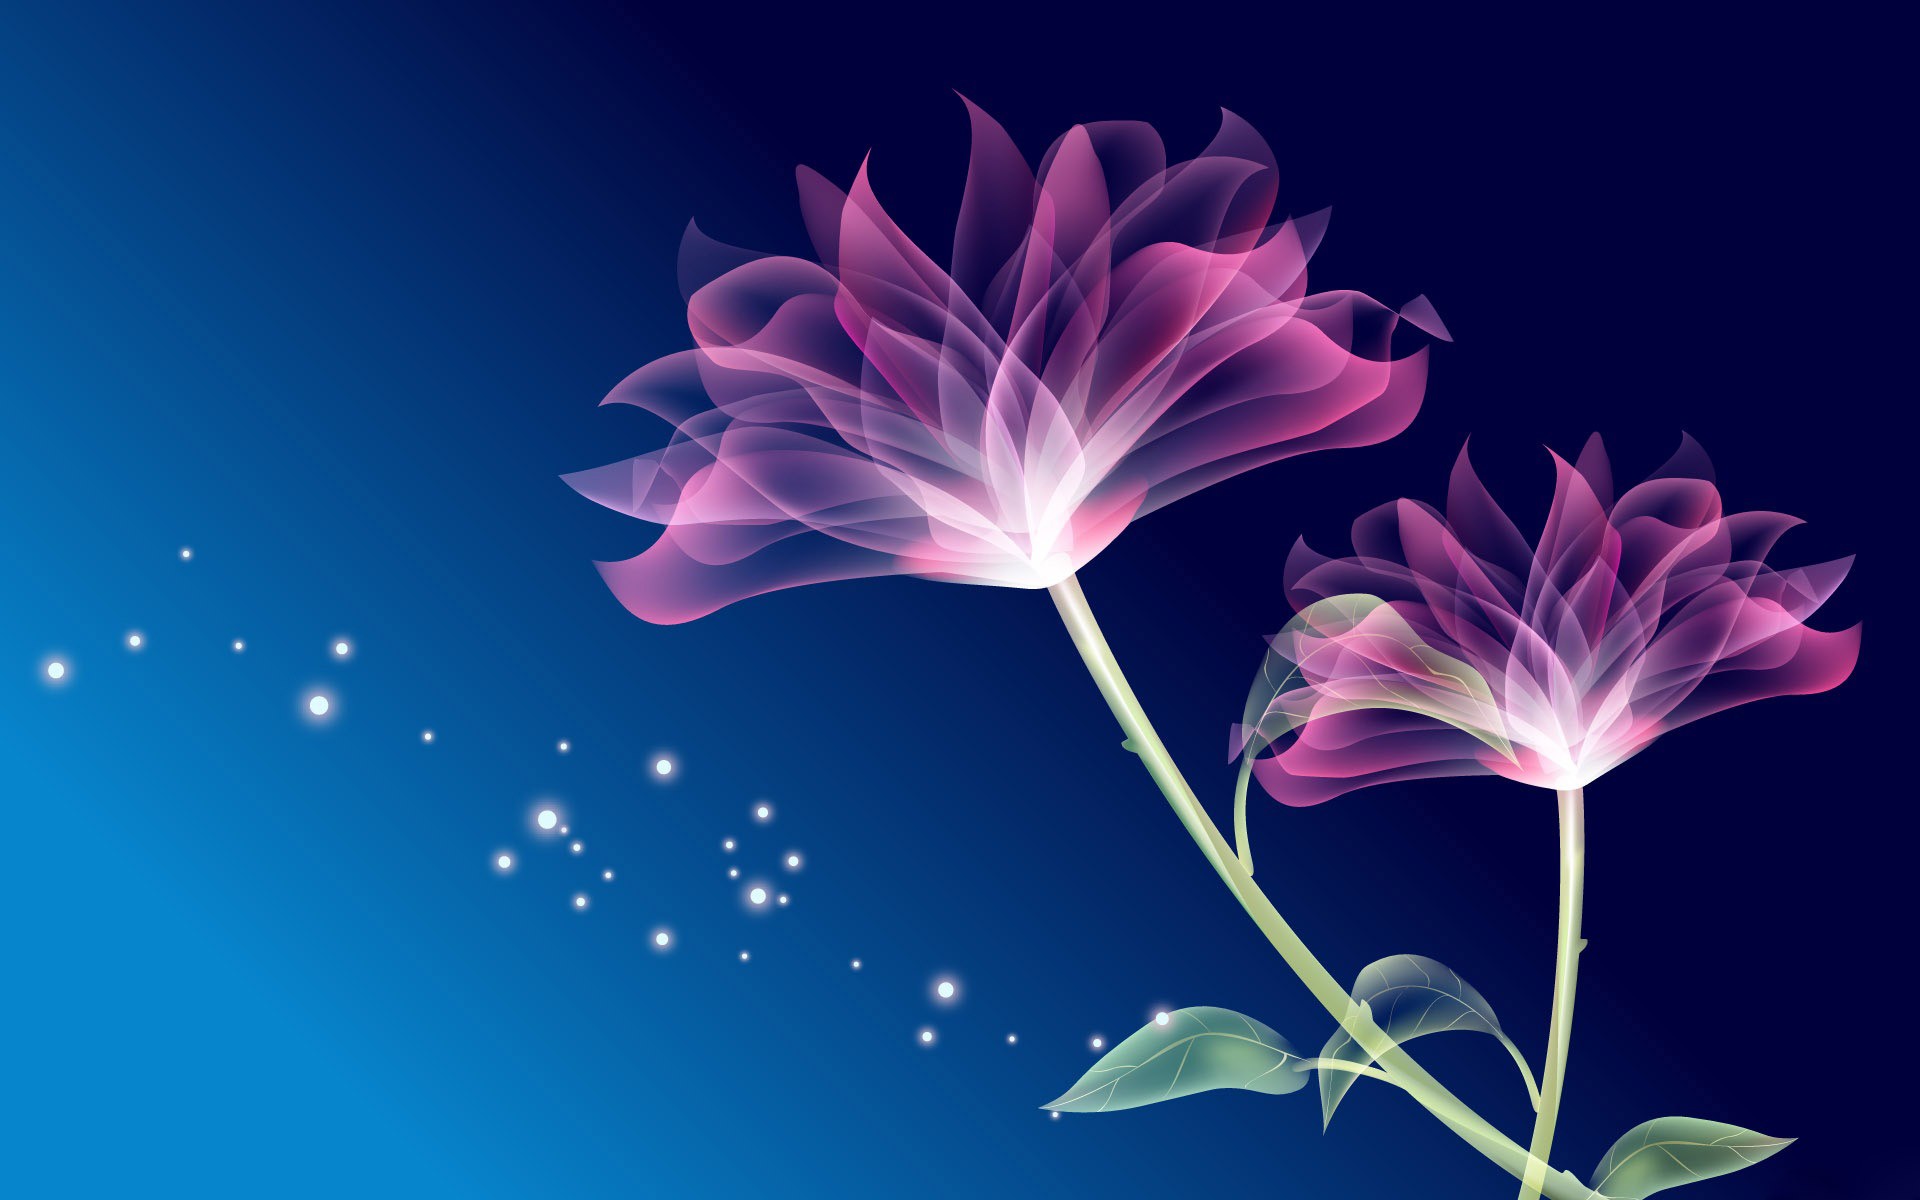 Flower Abstract Best HD Wallpaper Gallery Picture